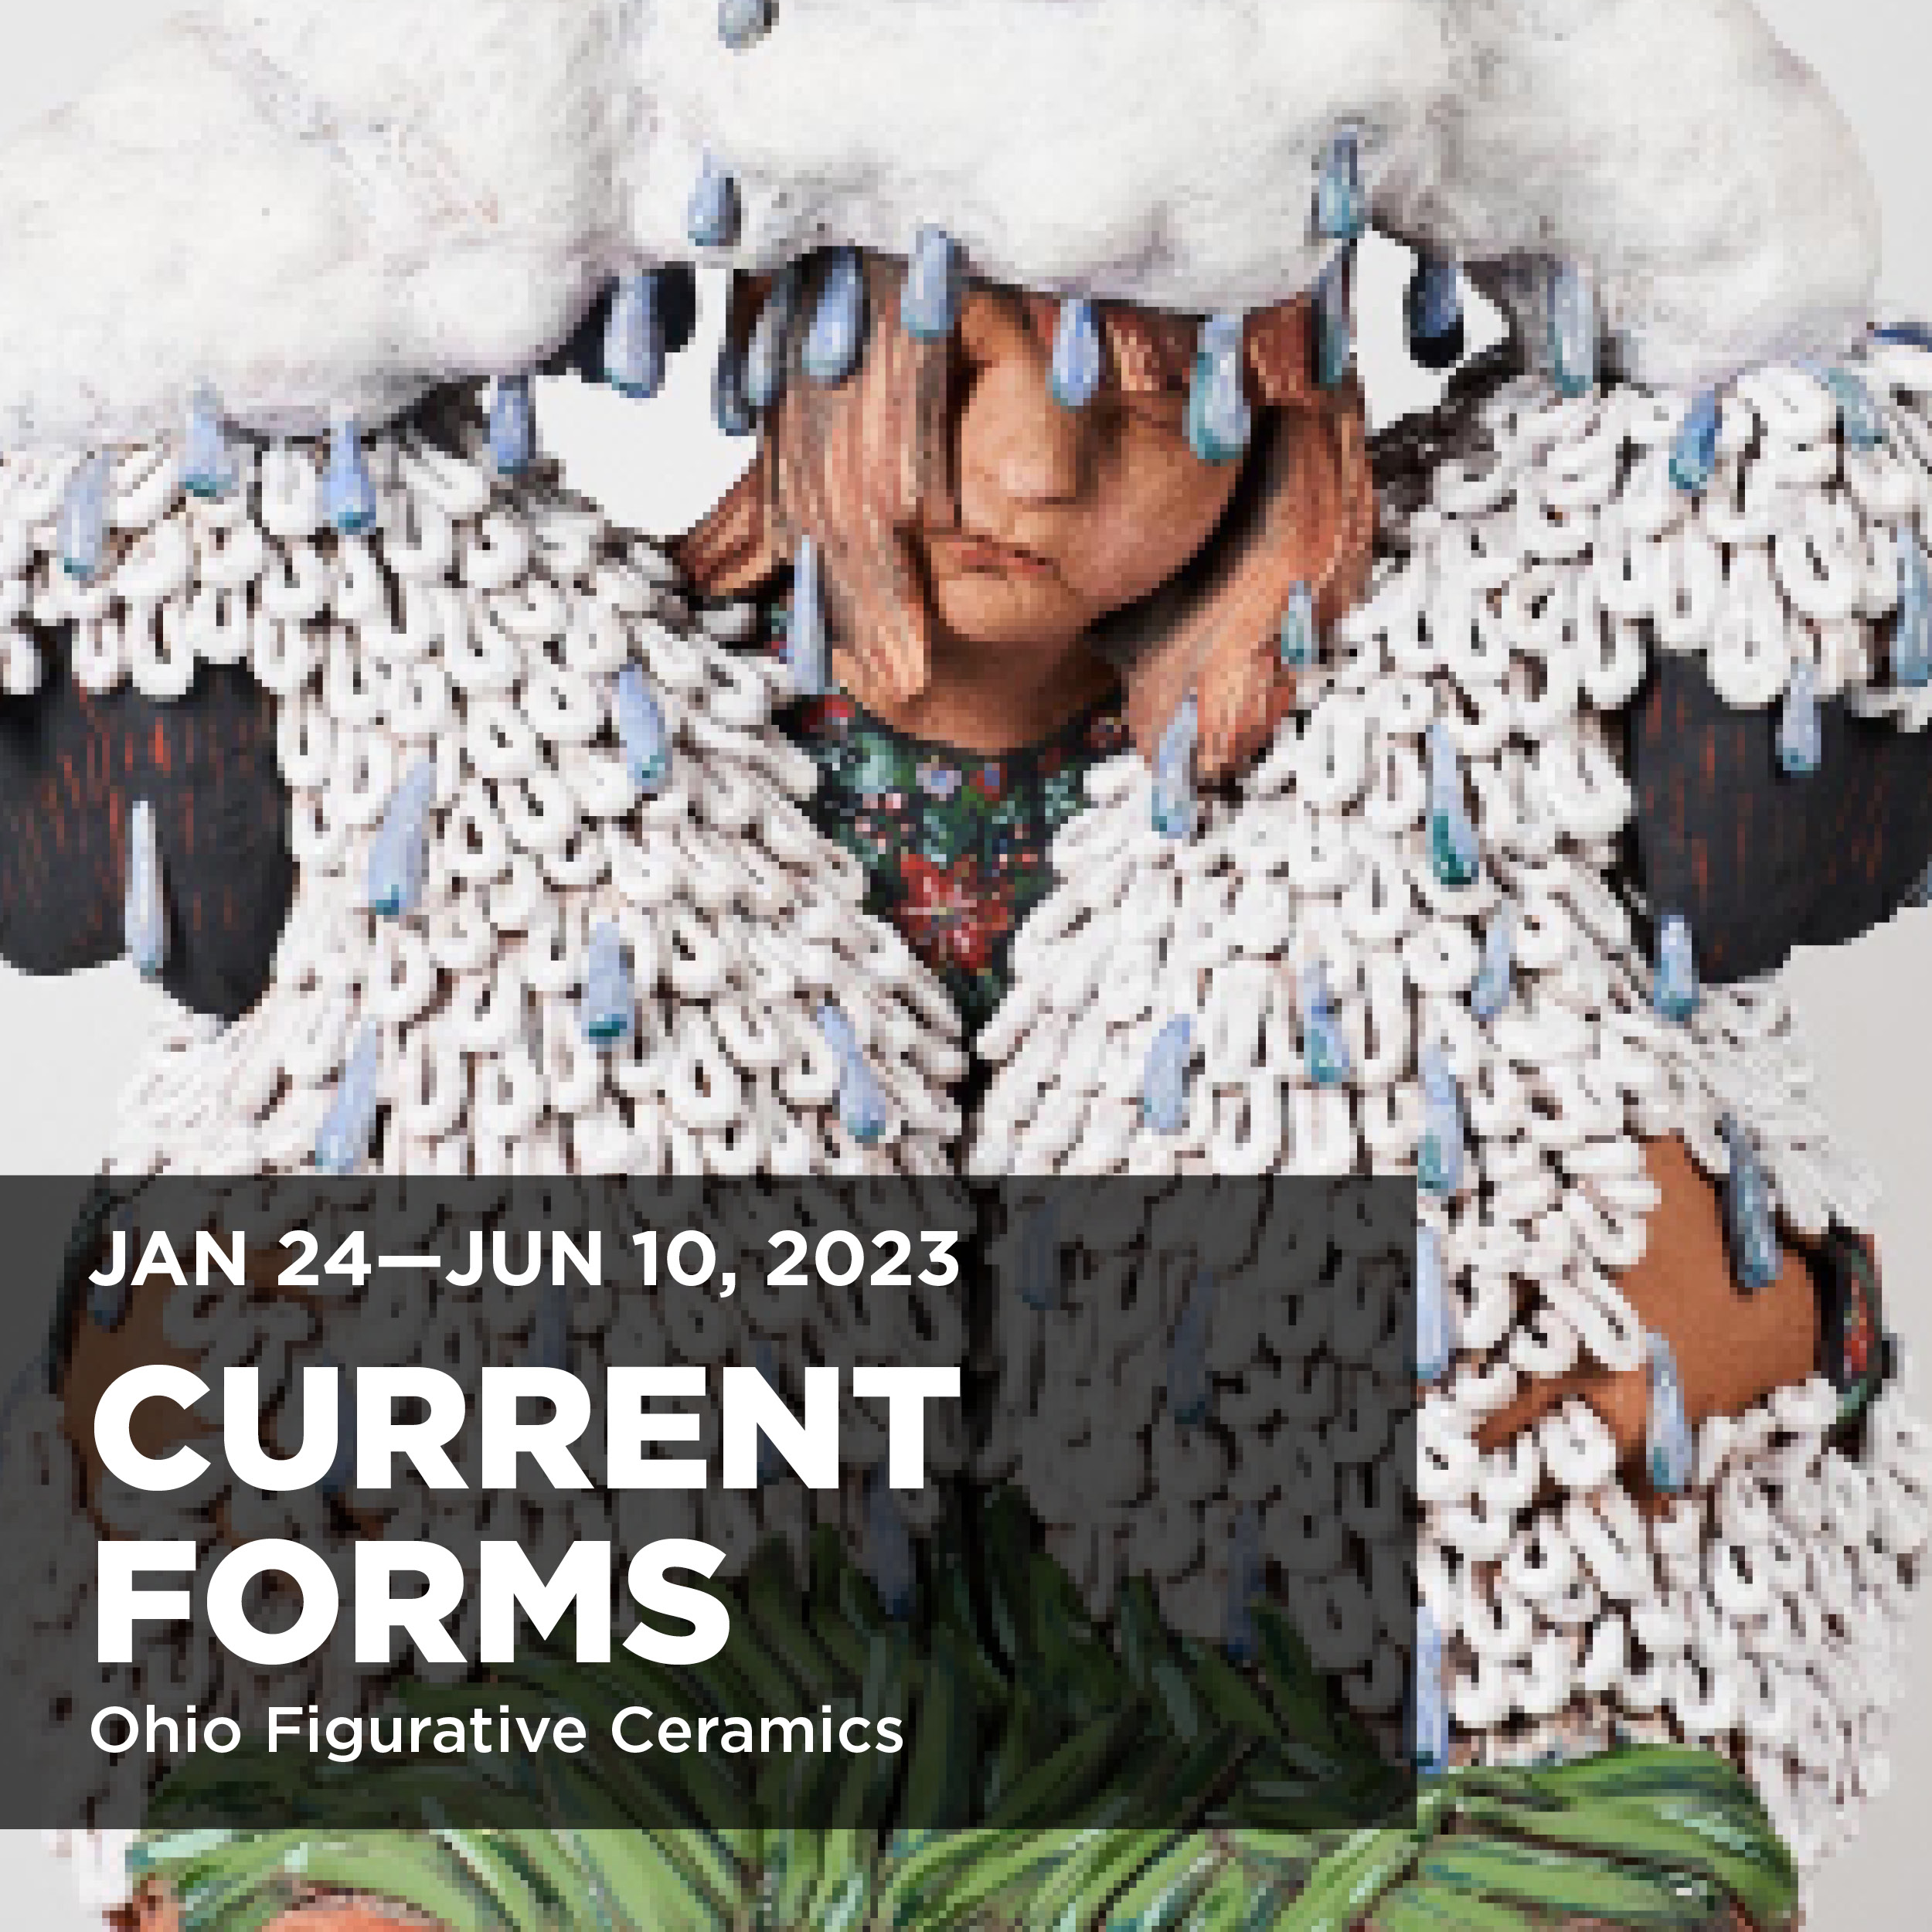 Poster image for the exhibition Current Forms: Ohio Figurative Ceramics on display January 24, 2023 to June 10, 2023